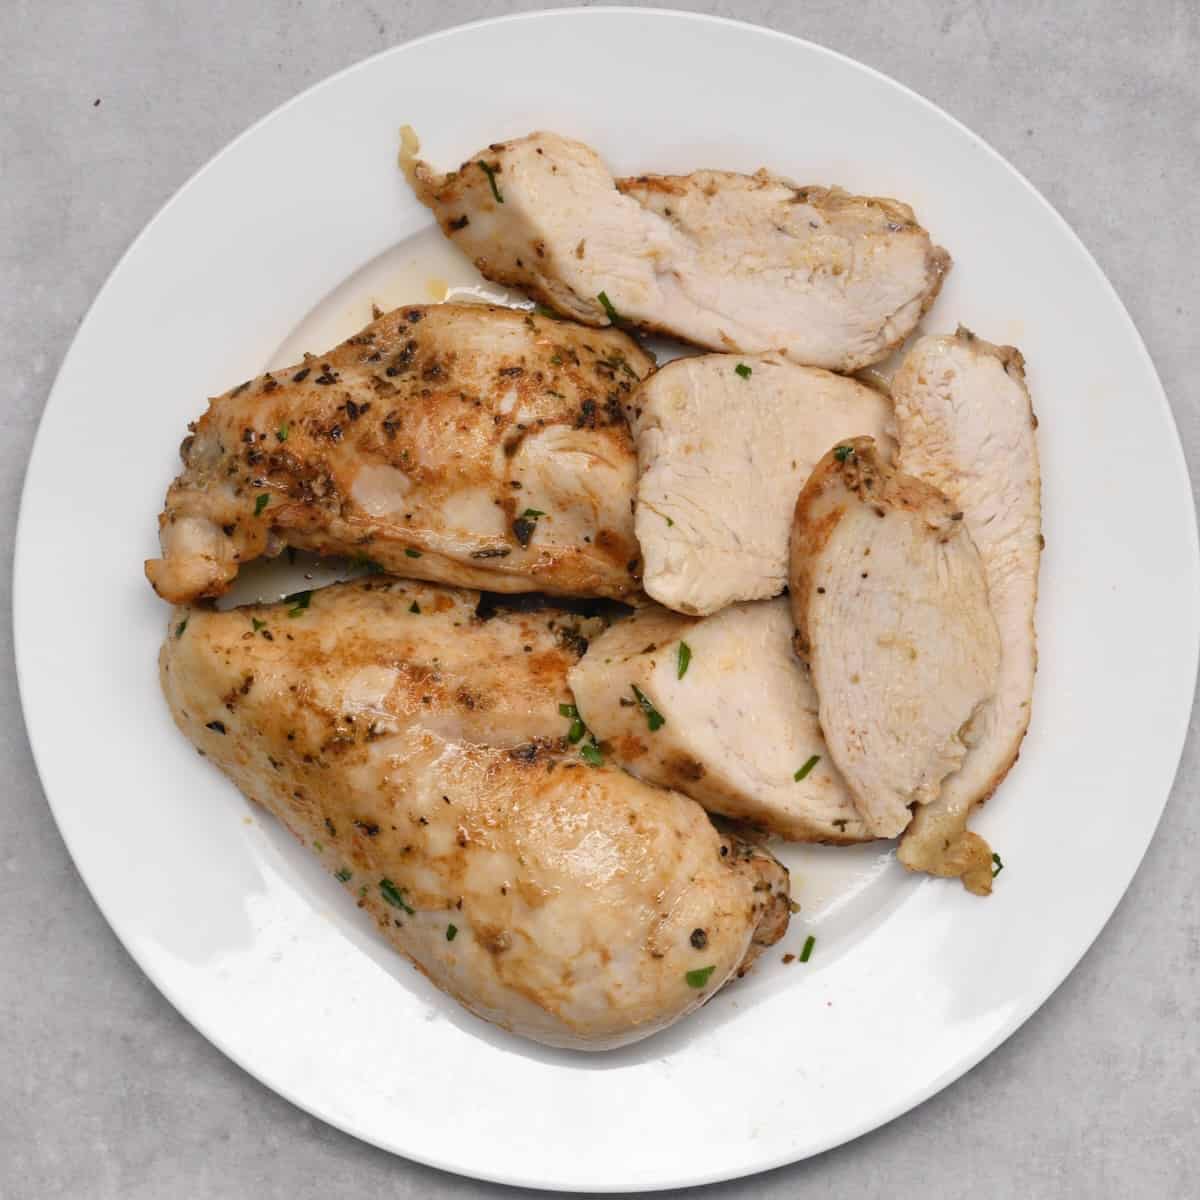 Cooked chicken cut into slices